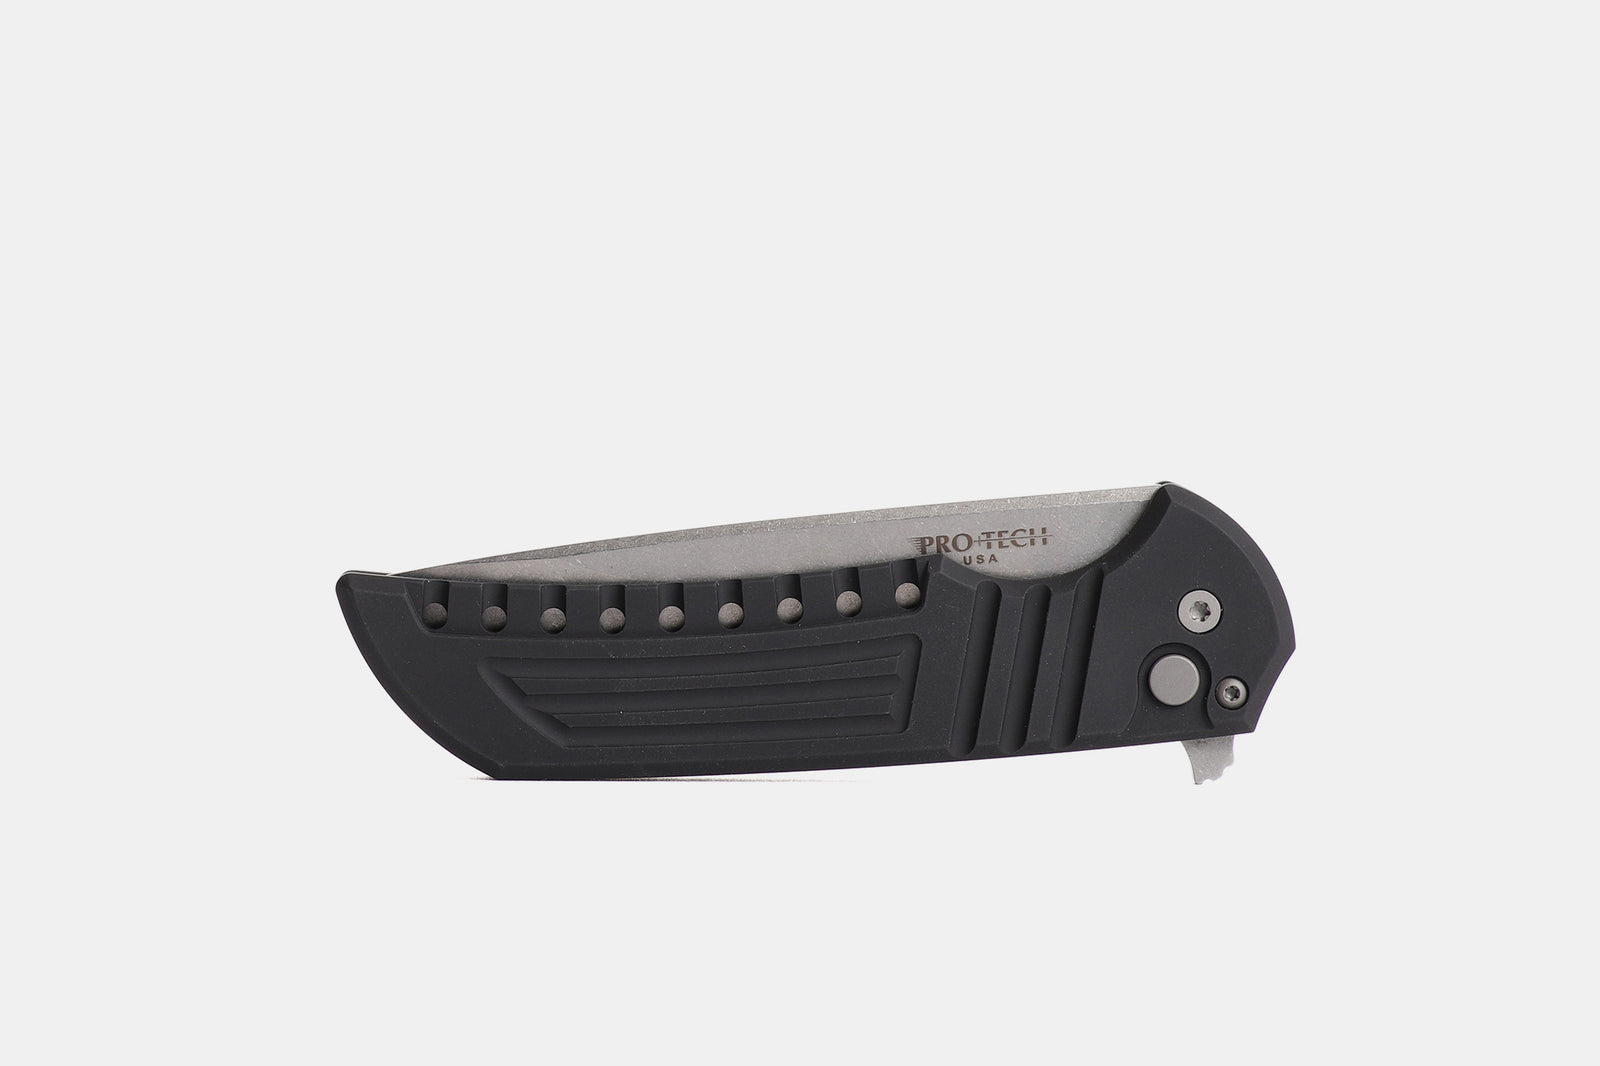 Pro-Tech Knives Mordax in Magnacut designed by Ferrum Forge with Aluminum milled handles and button lock stonewashed blade